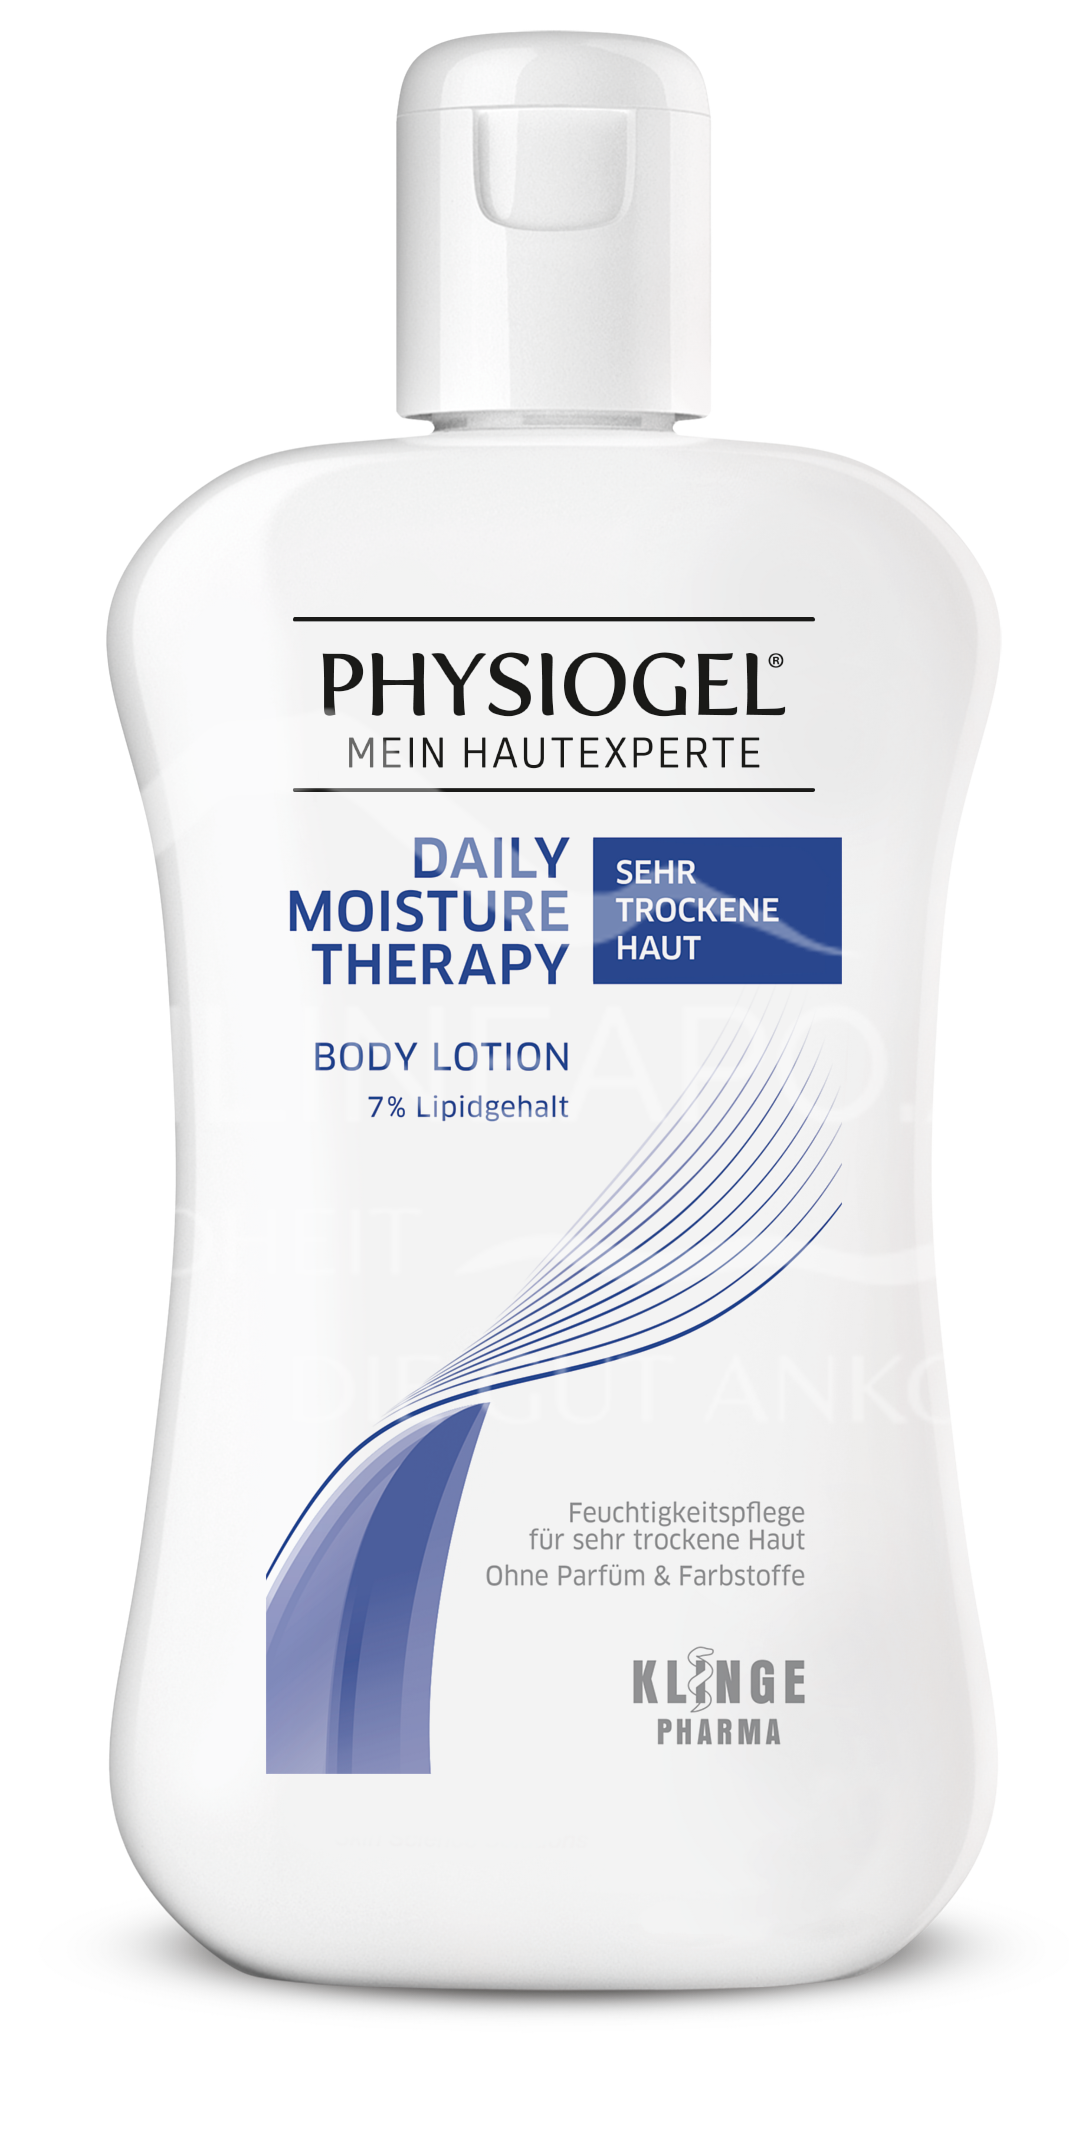 Physiogel® Daily Moisture Therapy Body Lotion - Sehr trockene Haut